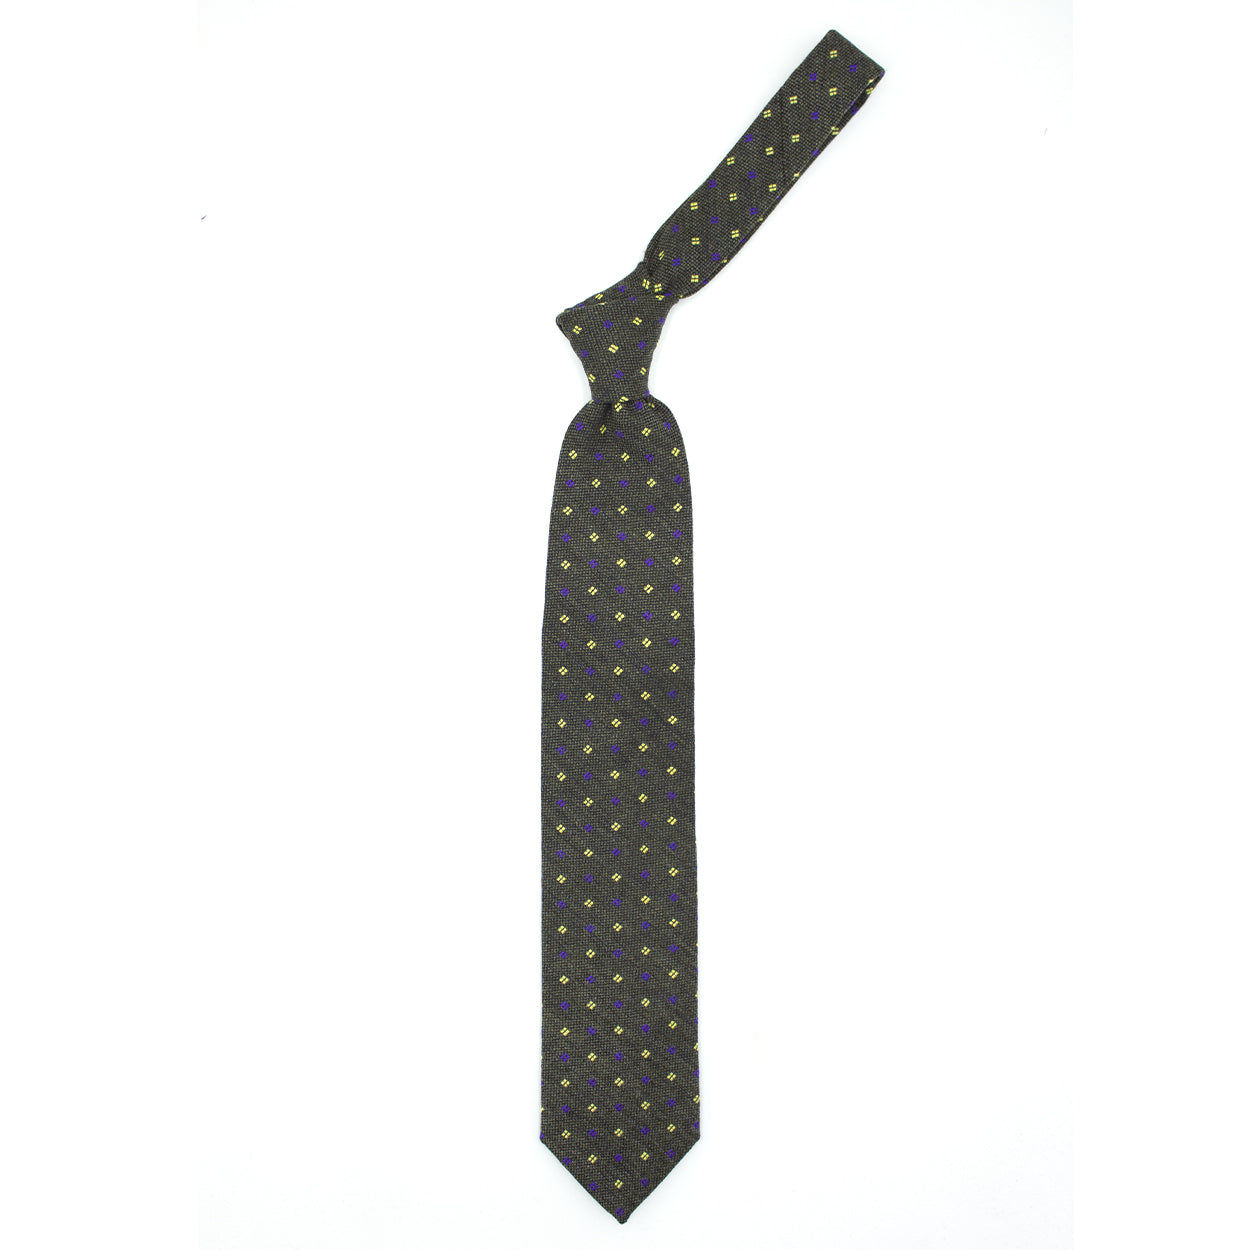 Moss green tie with purple and yellow squares